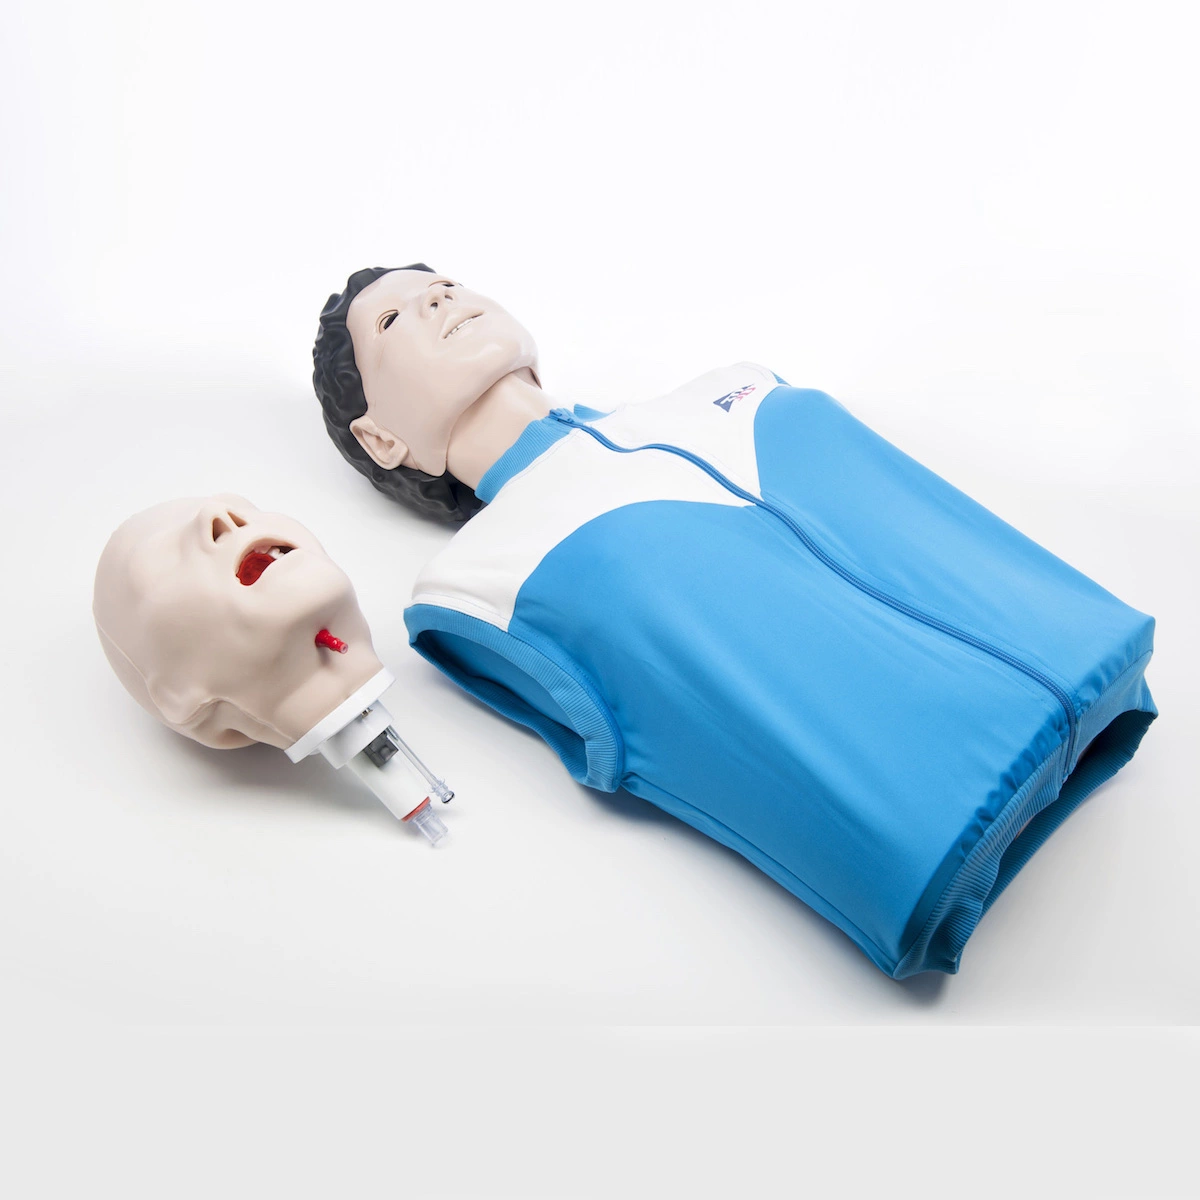 CPRLily AIR for CPR and Airway Management Training- Vishalsurgical.co.in